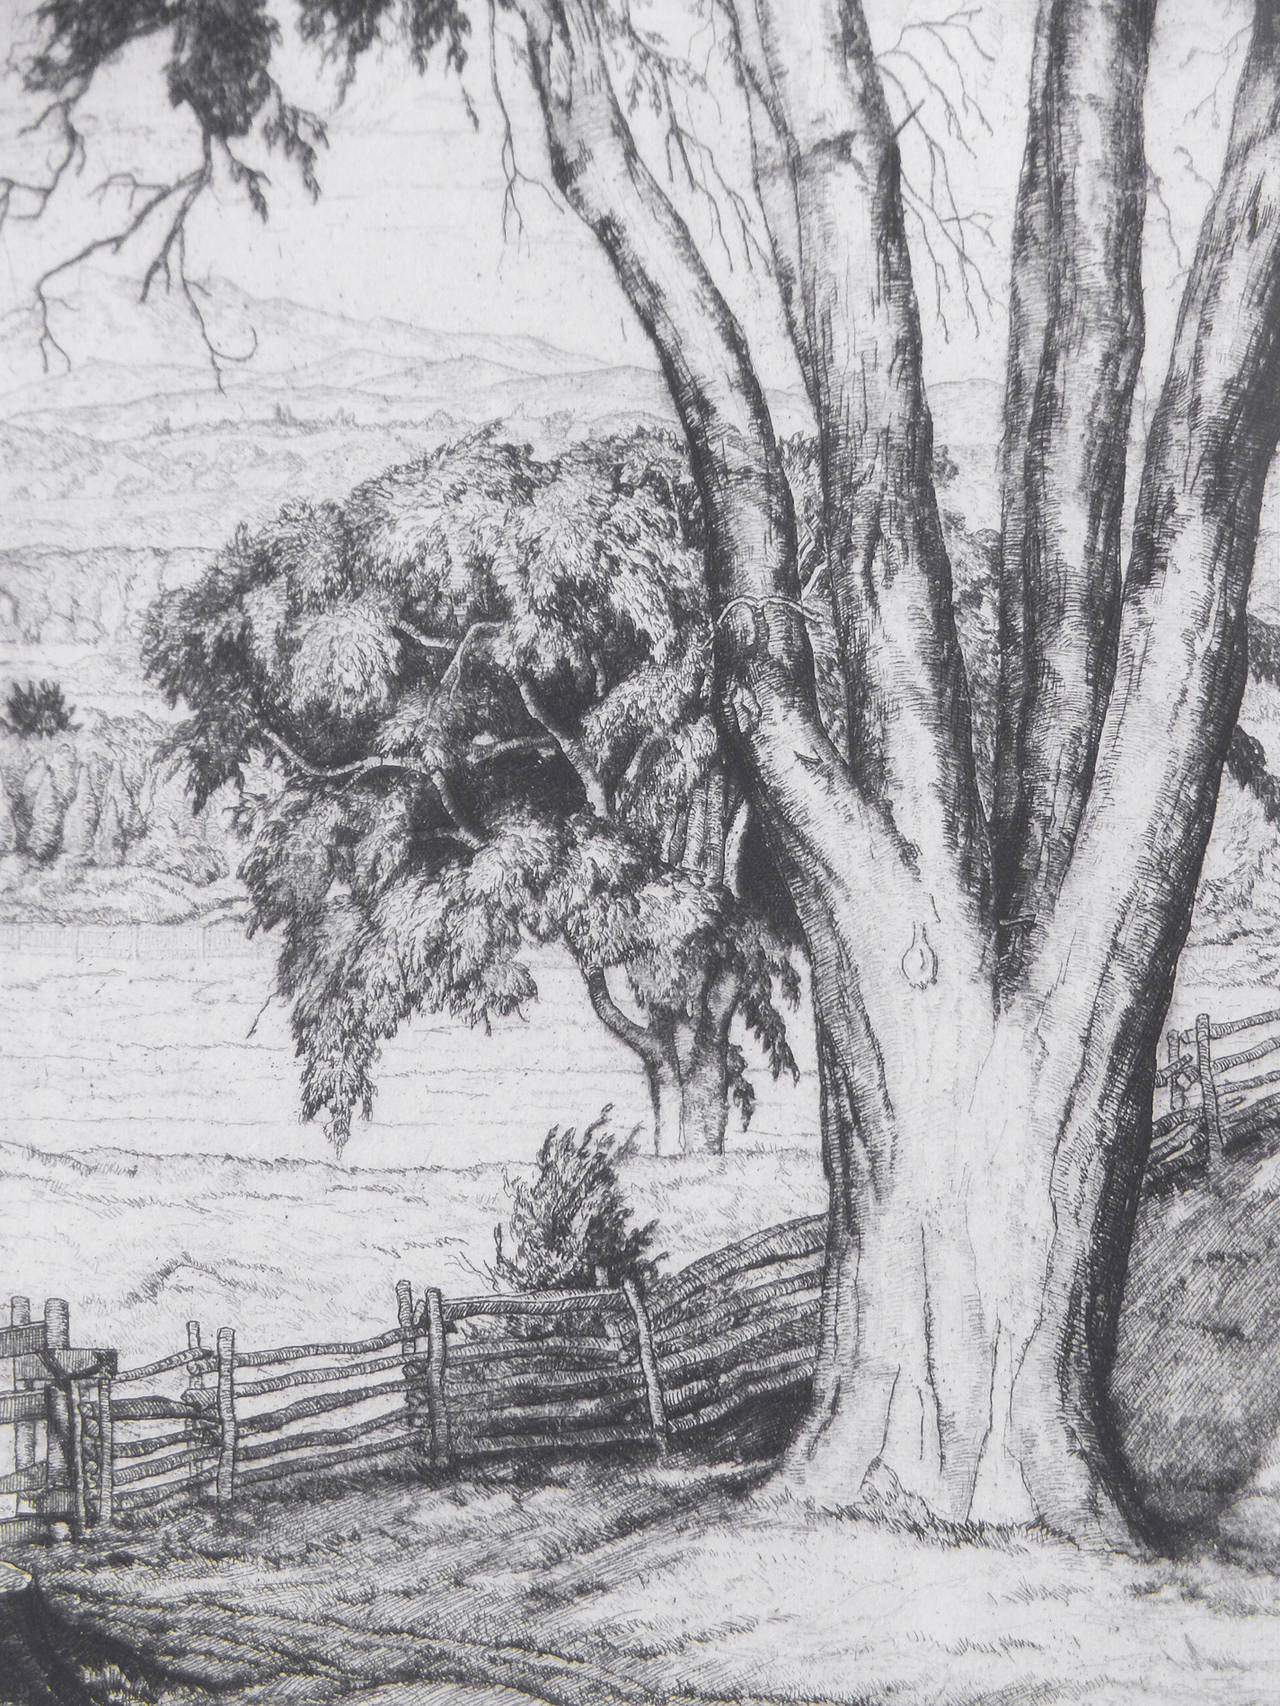 Beautifully capturing a lovely scene of rollings hills, planted fields, rail fences and an old elm tree in the foreground, this is one of Luigi Lucioni's finest prints. Lucioni is best known as a realist, producing still lifes, landscapes and